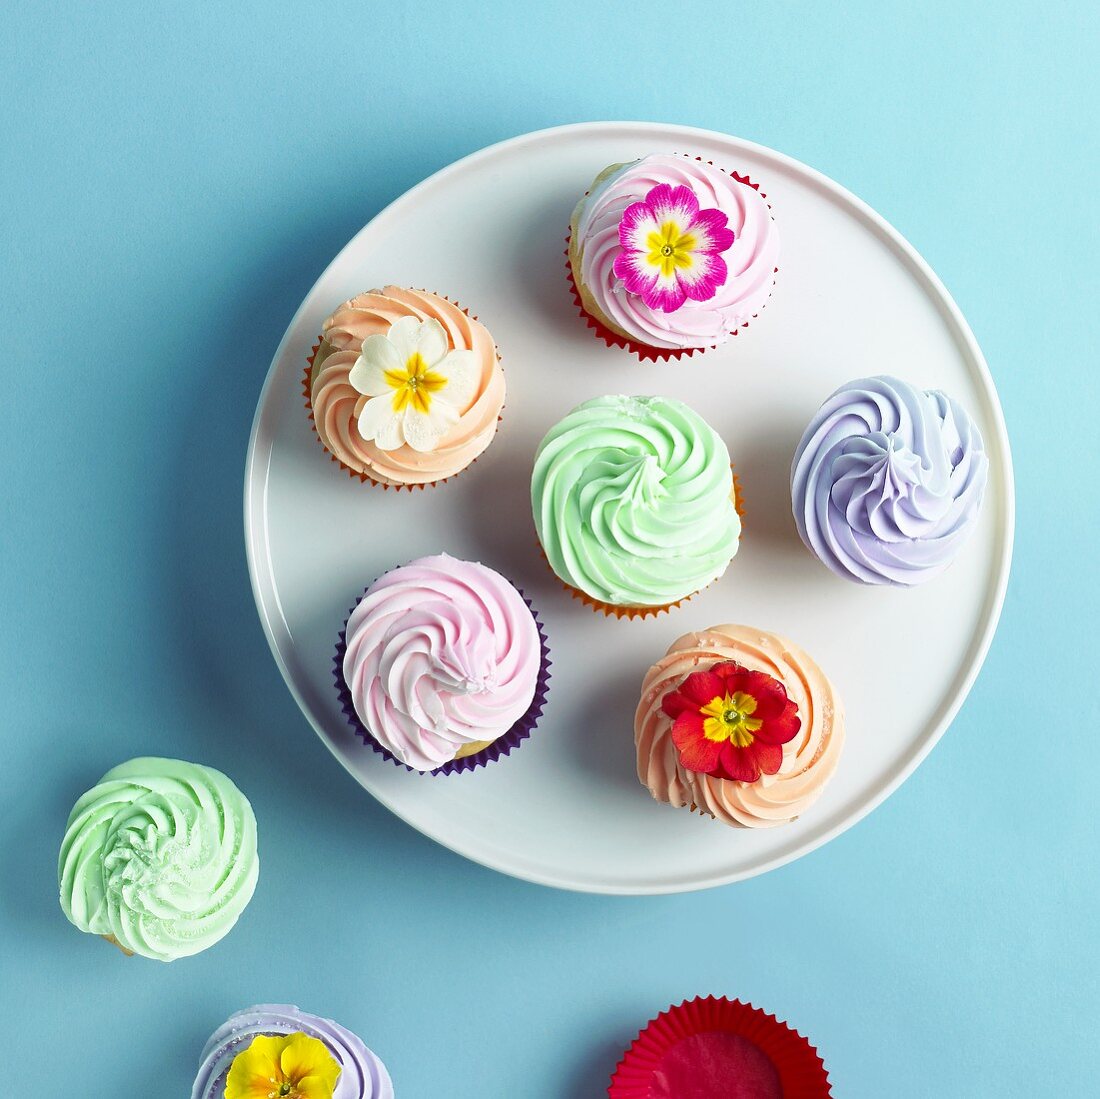 Pastel Cupcakes; Some with Flower Garnishes